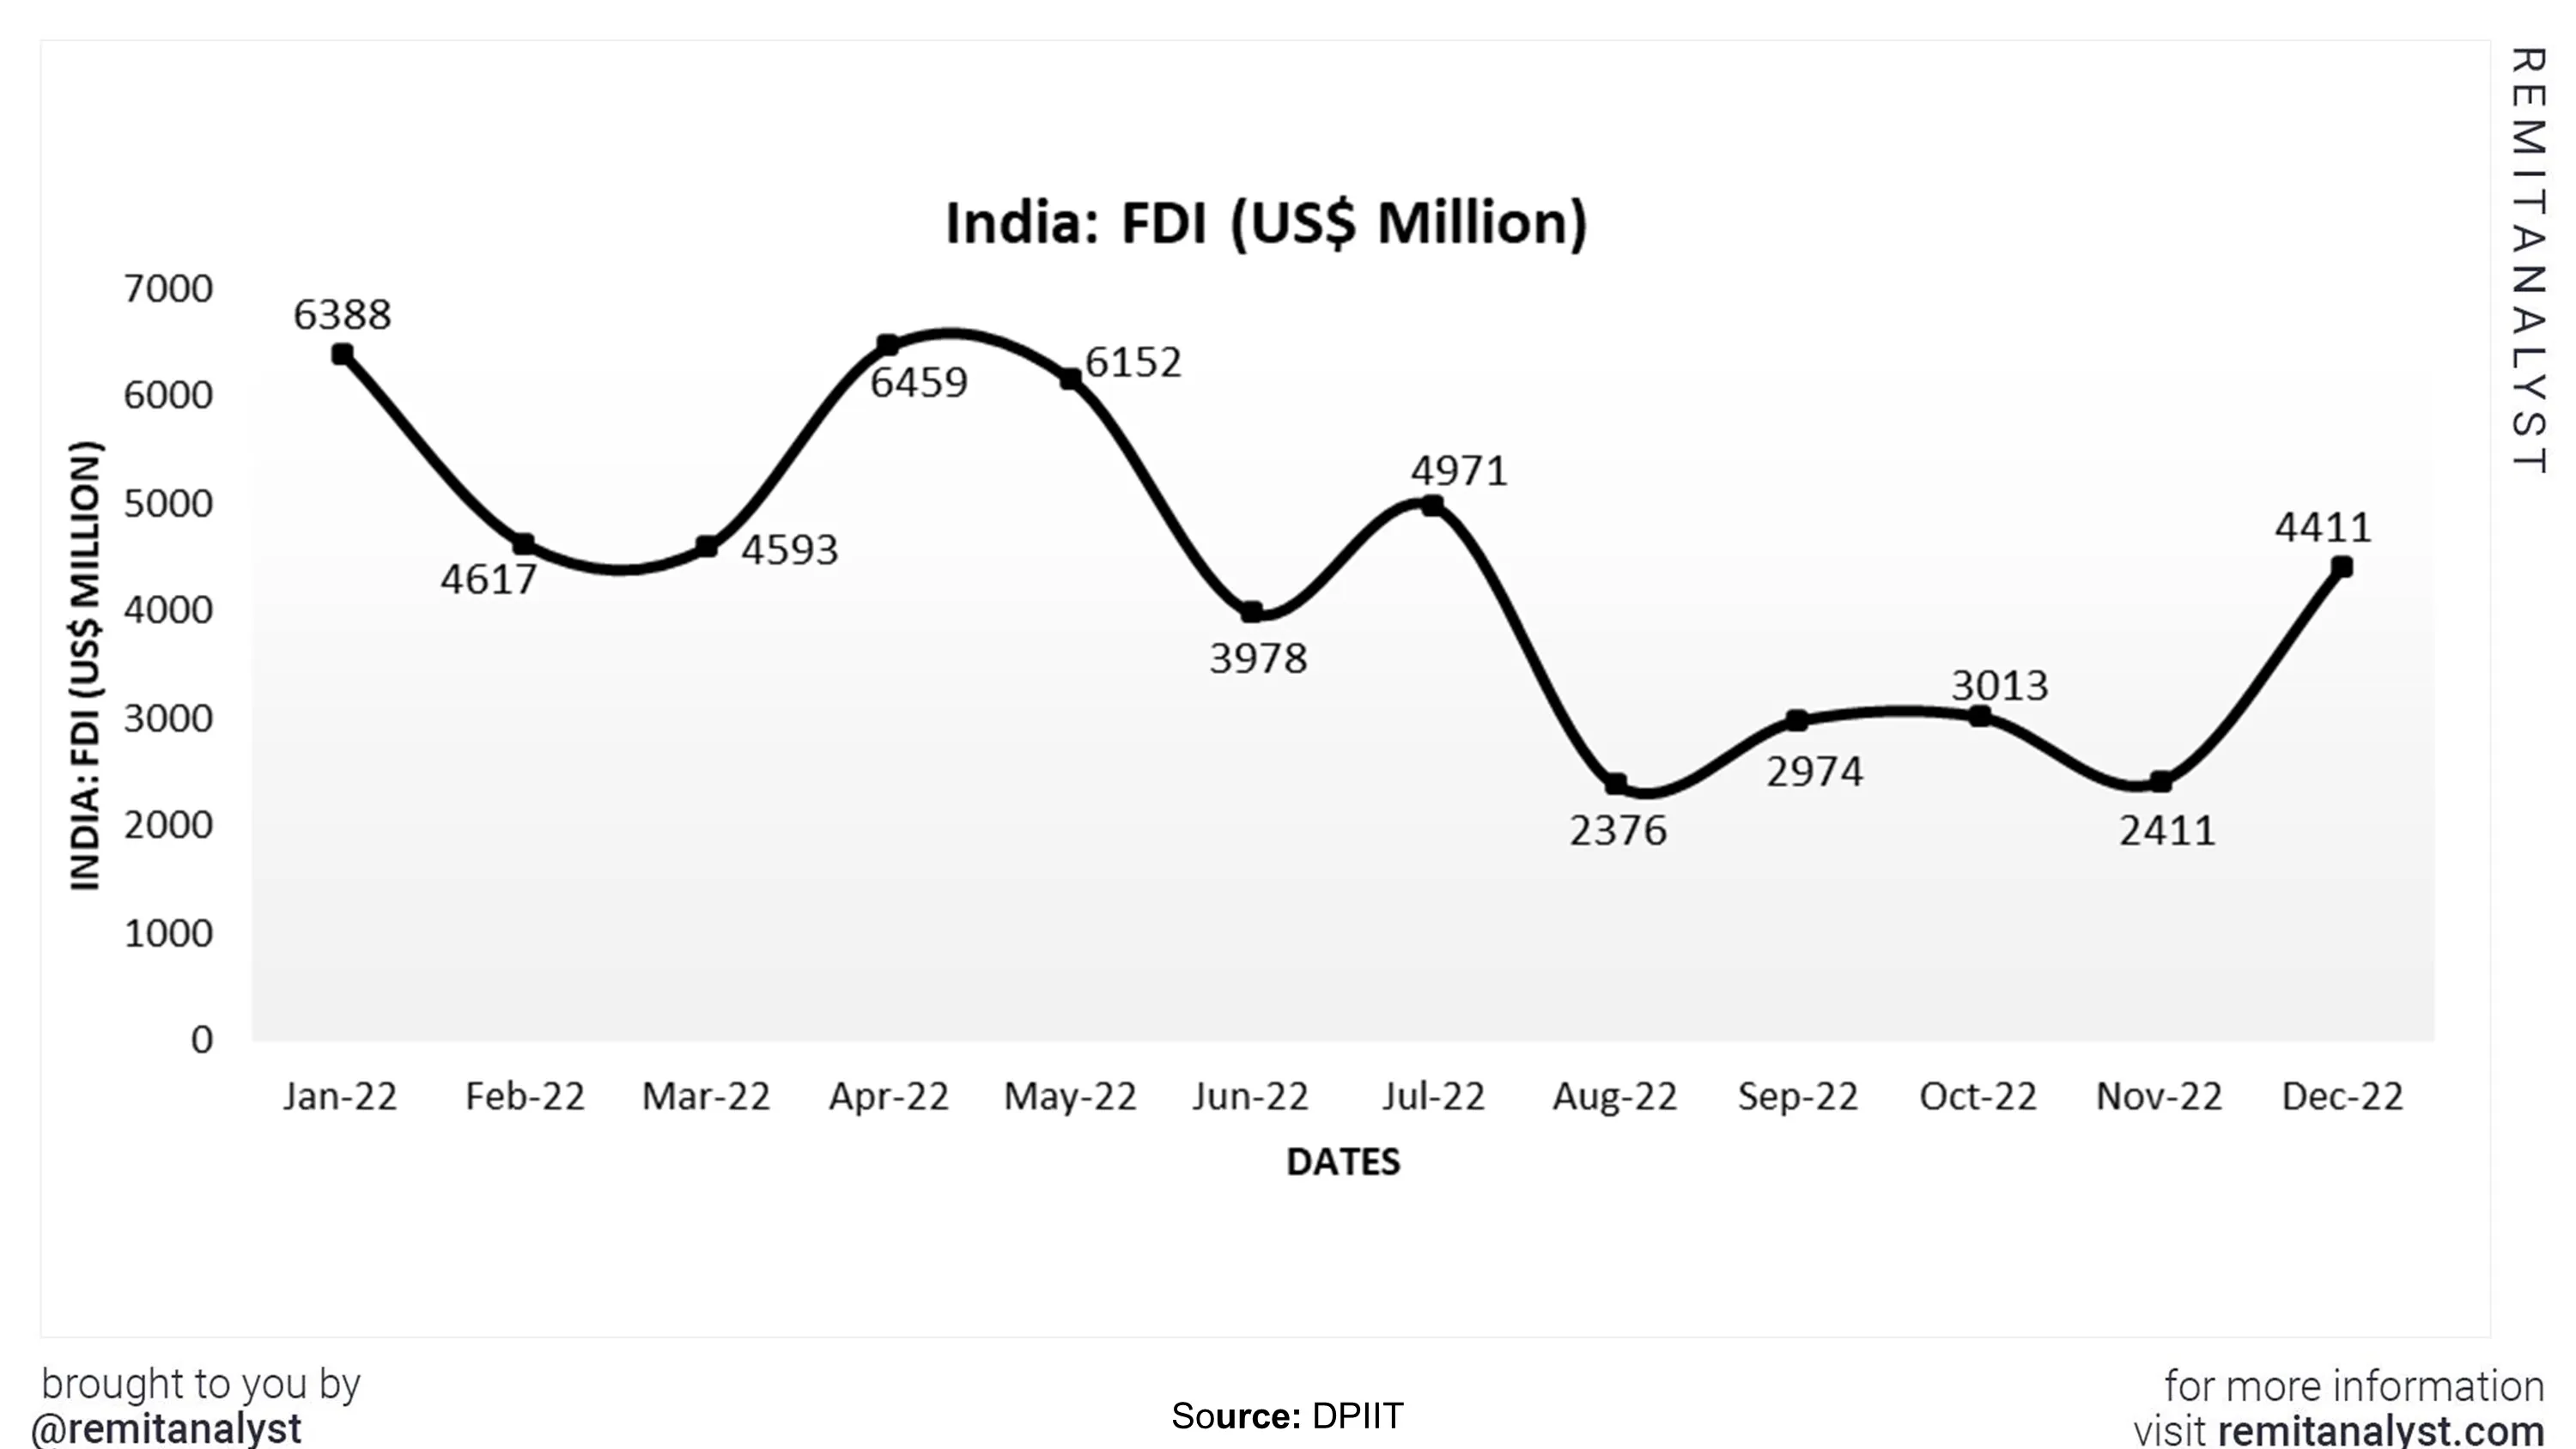 fdi-in-india-from-jan-2022-to-dec-2022